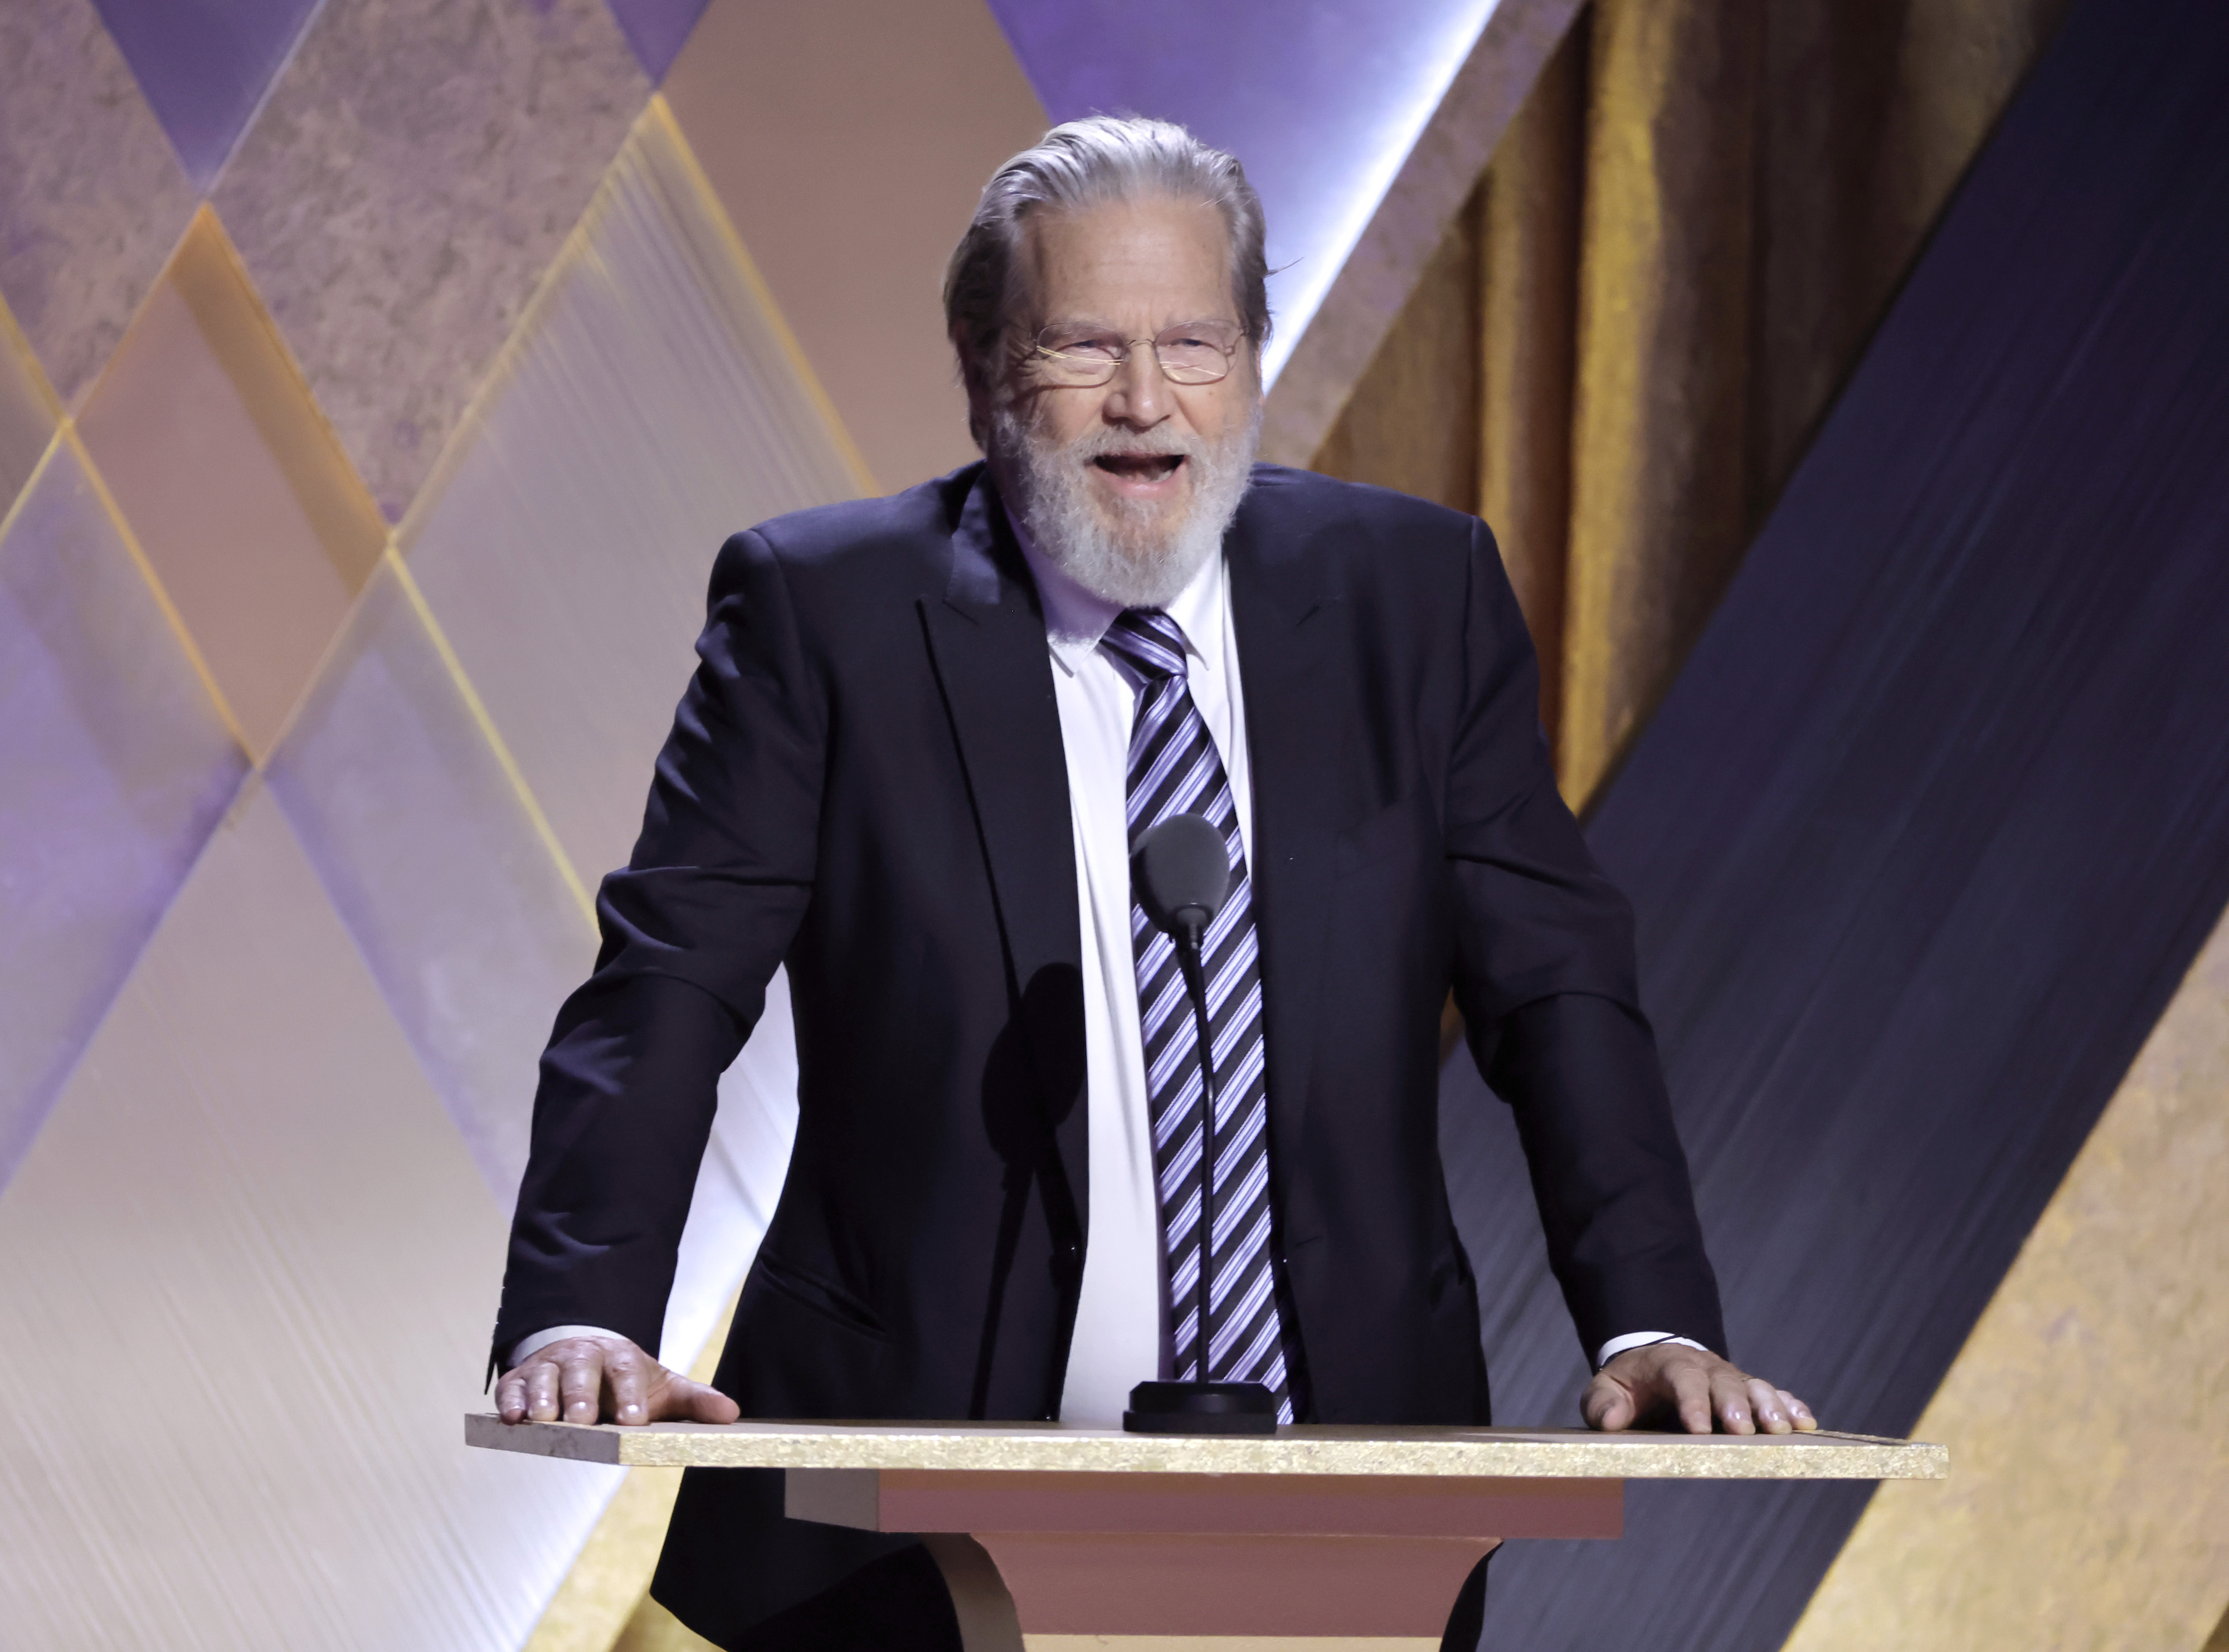 Jeff Bridges speaks onstage during the Academy of Motion Picture Arts and Sciences 13th Governors Awards in Los Angeles, California, on November 19, 2022. | Source: Getty Images